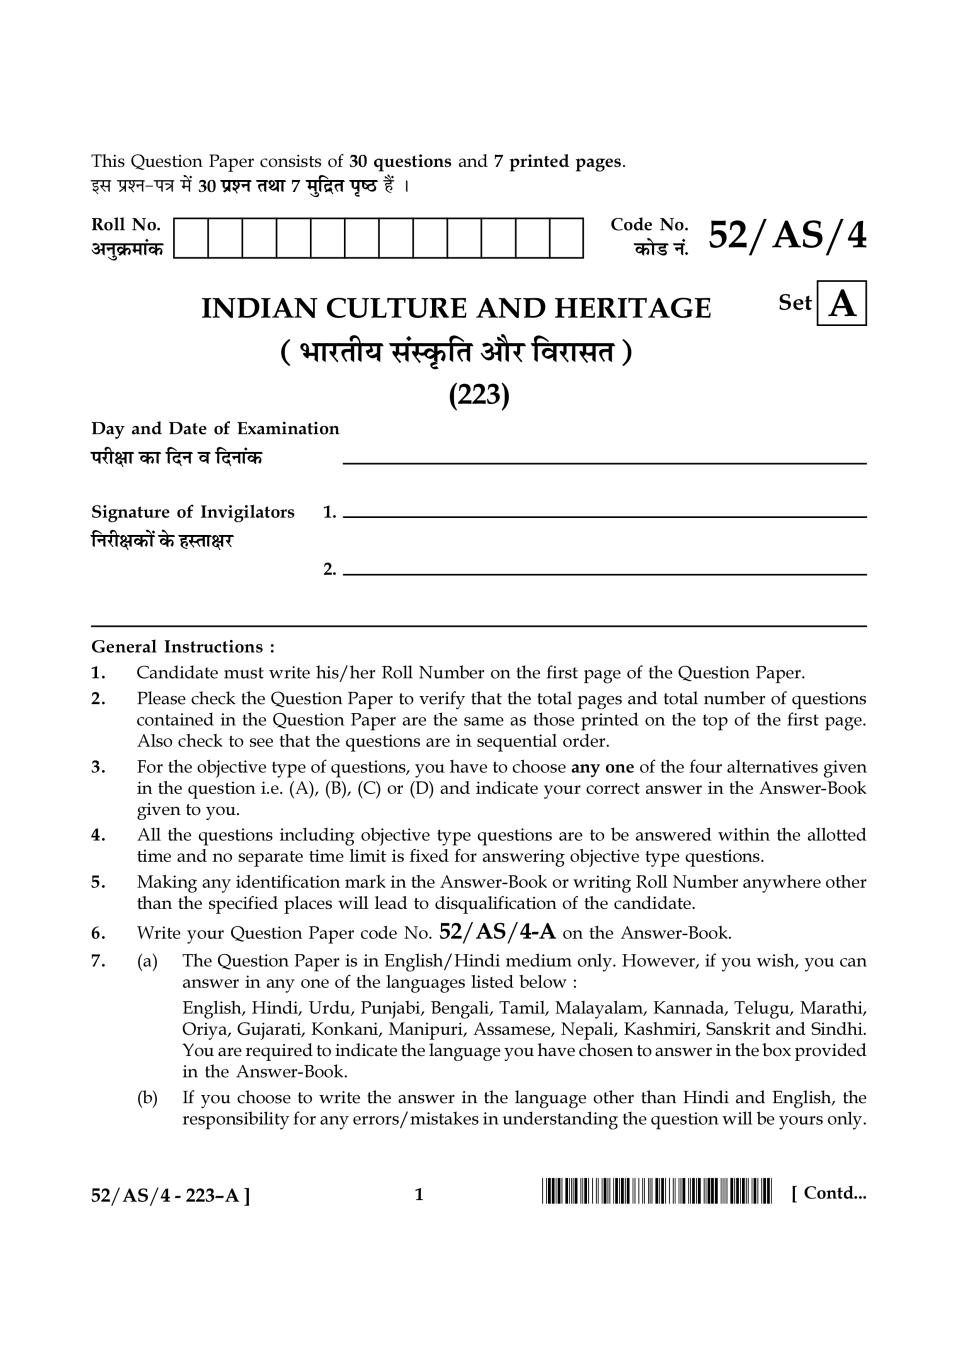 NIOS Class 10 Question Paper Apr 2016 - Indian Culture And Heritage - Page 1